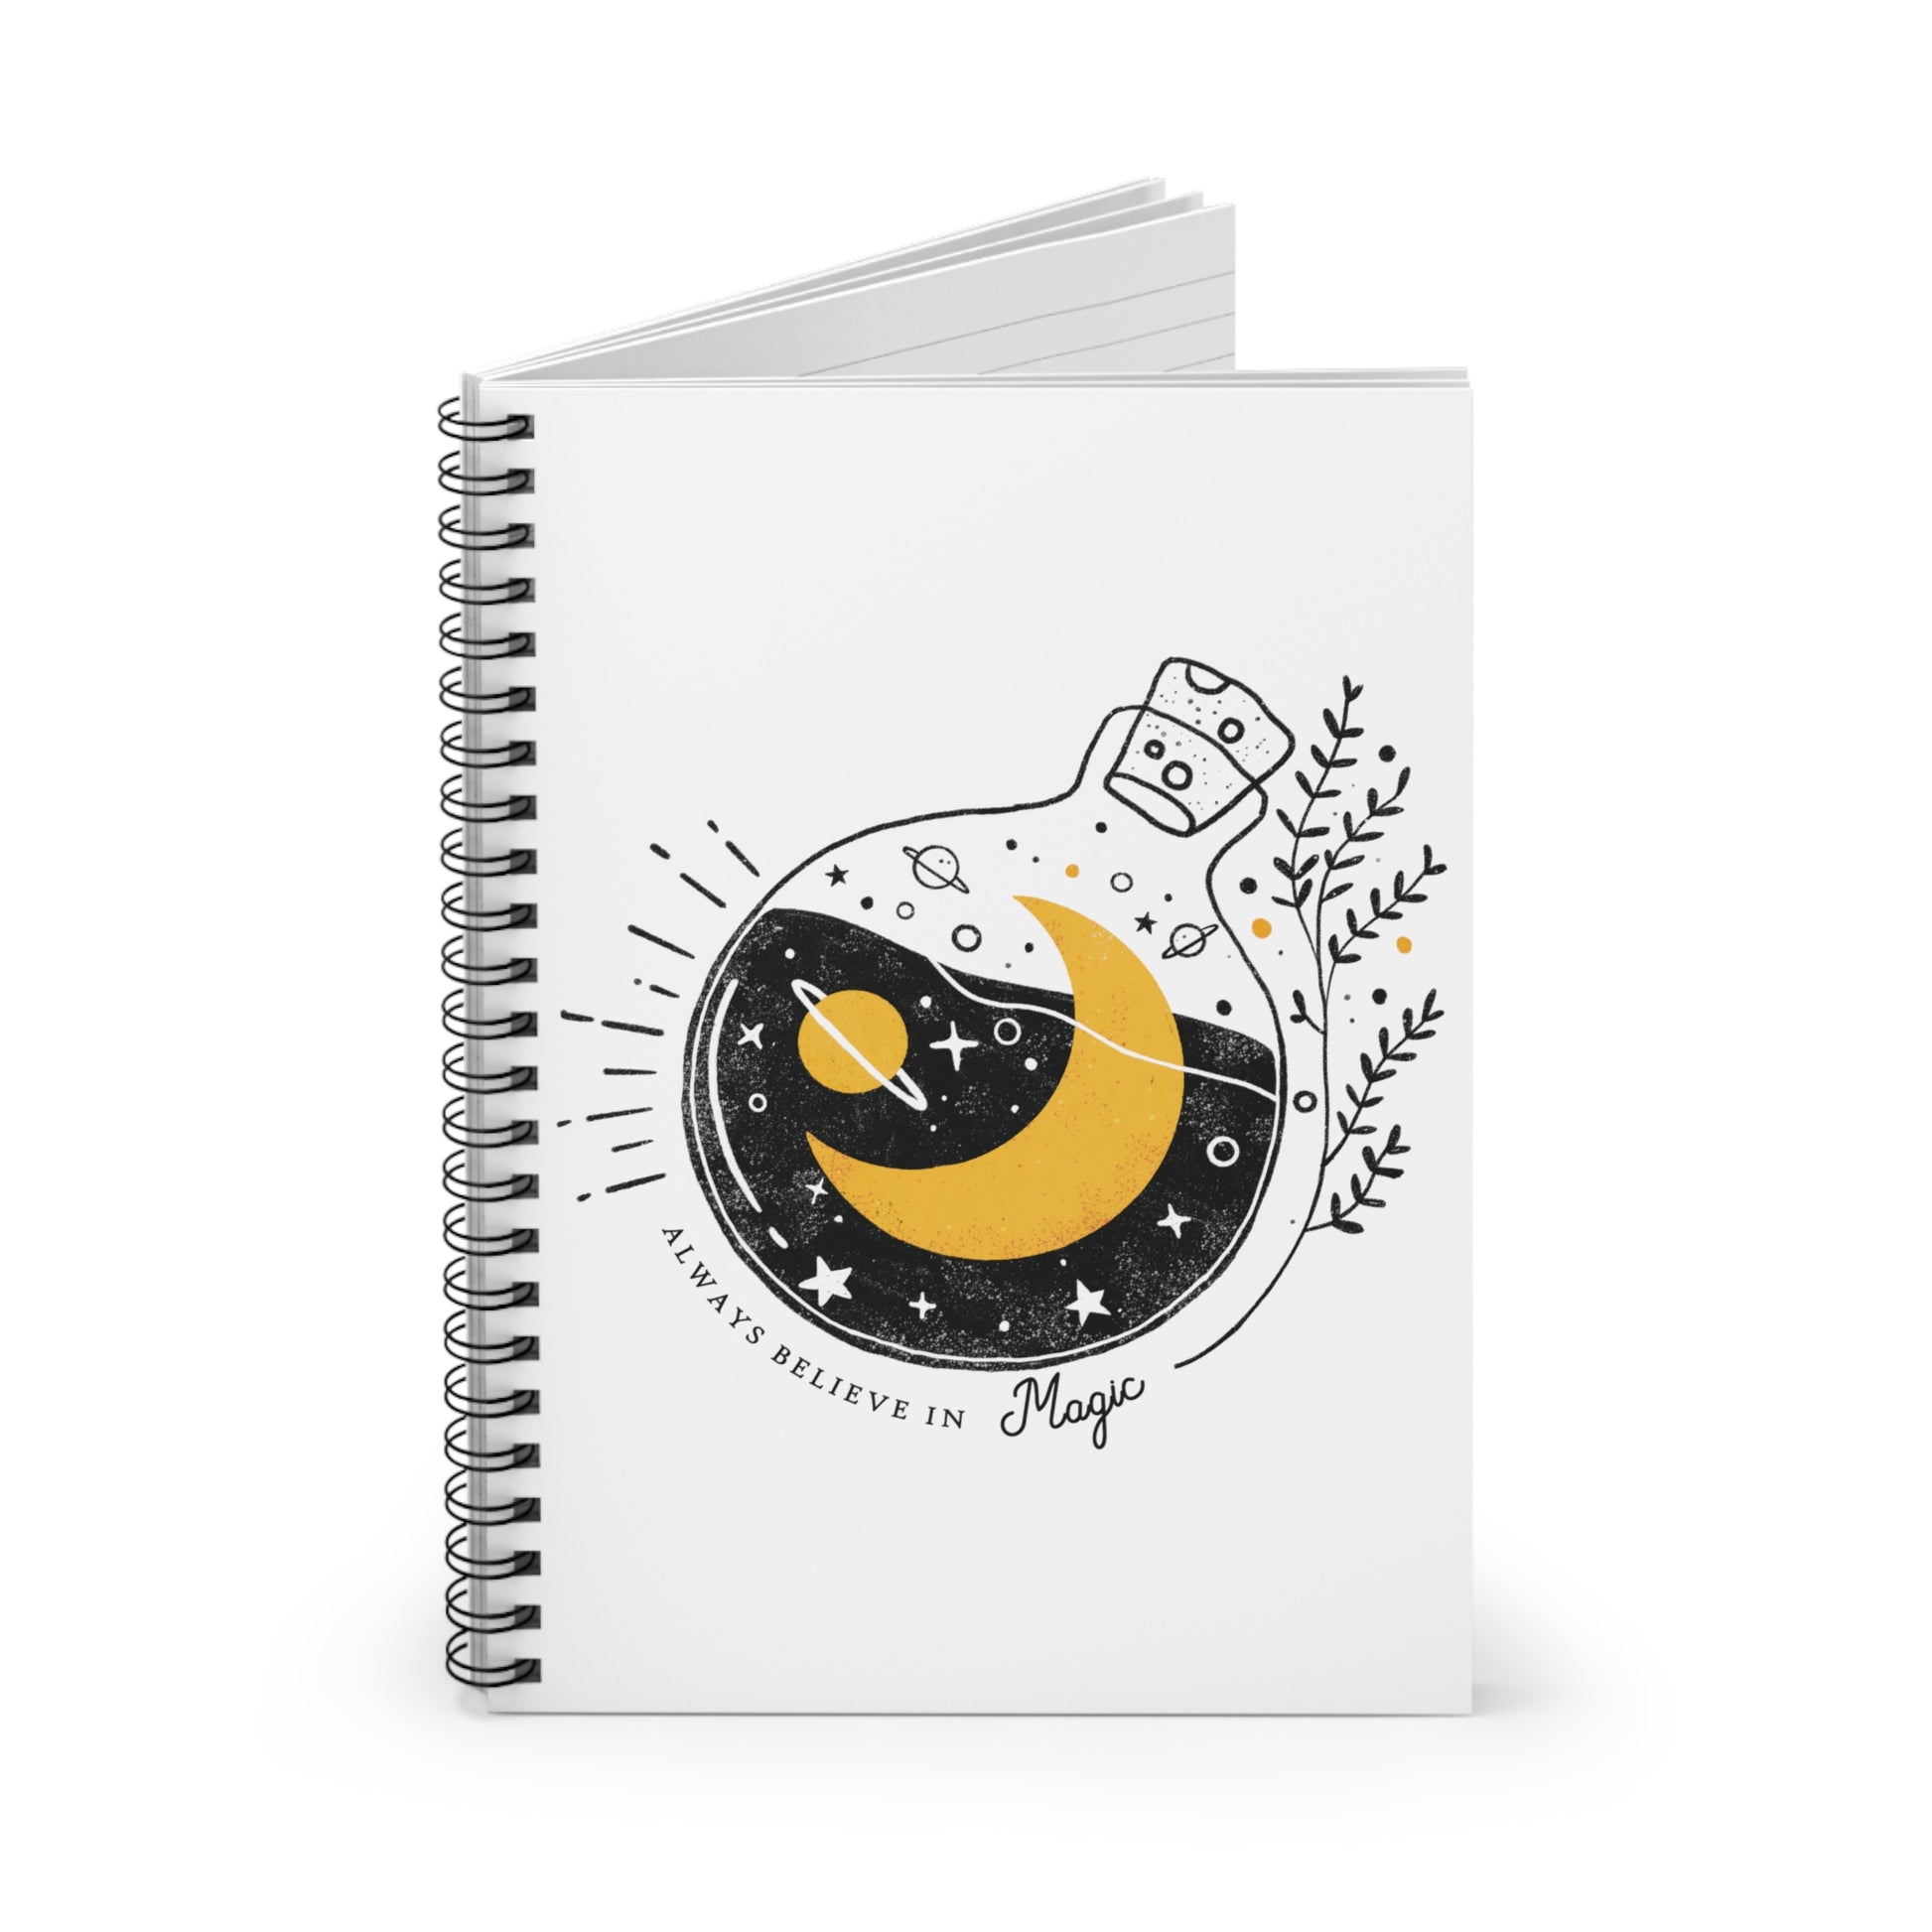 Believe in Magic: Spiral Notebook - Log Books - Journals - Diaries - and More Custom Printed by TheGlassyLass